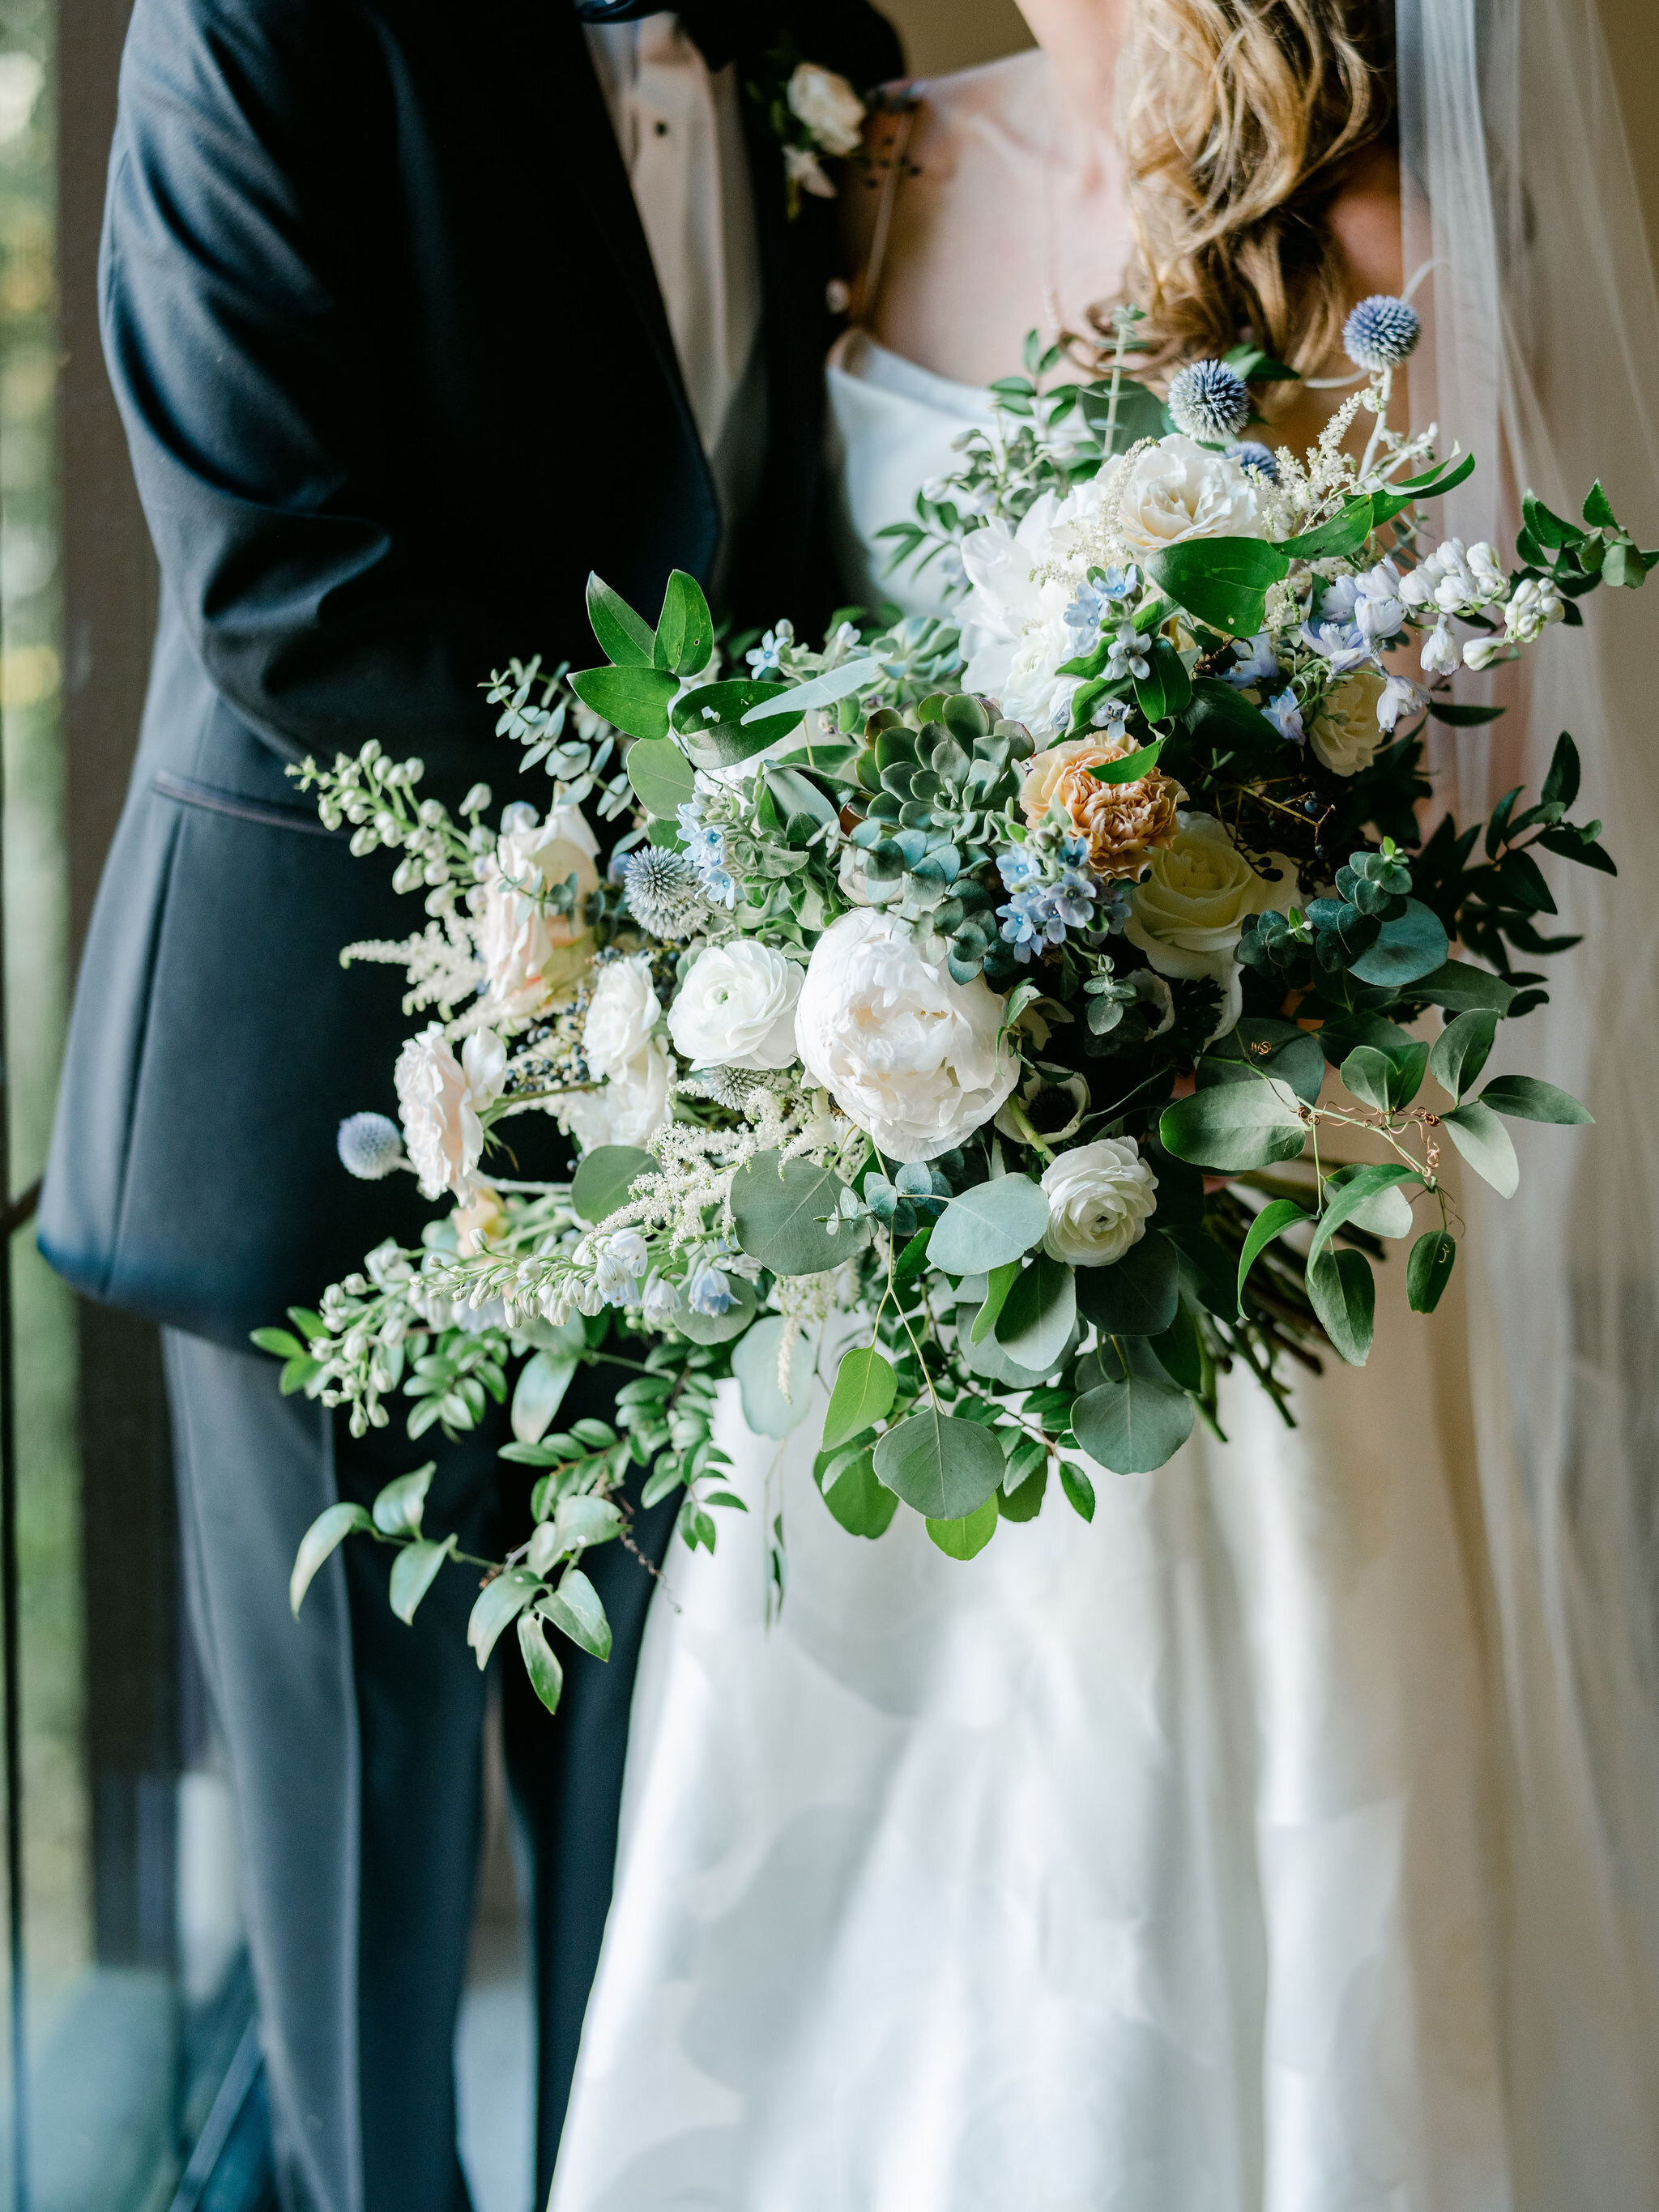 A lush and sprawling bridal bouquet filled to the brim. Blush and white garden roses, white peonies, blue thistle, delphinium, blue tweedia, white astilbe, white ranunculus, baby and silver dollar eucalyptus, huckleberry, and smilax vine are just so…